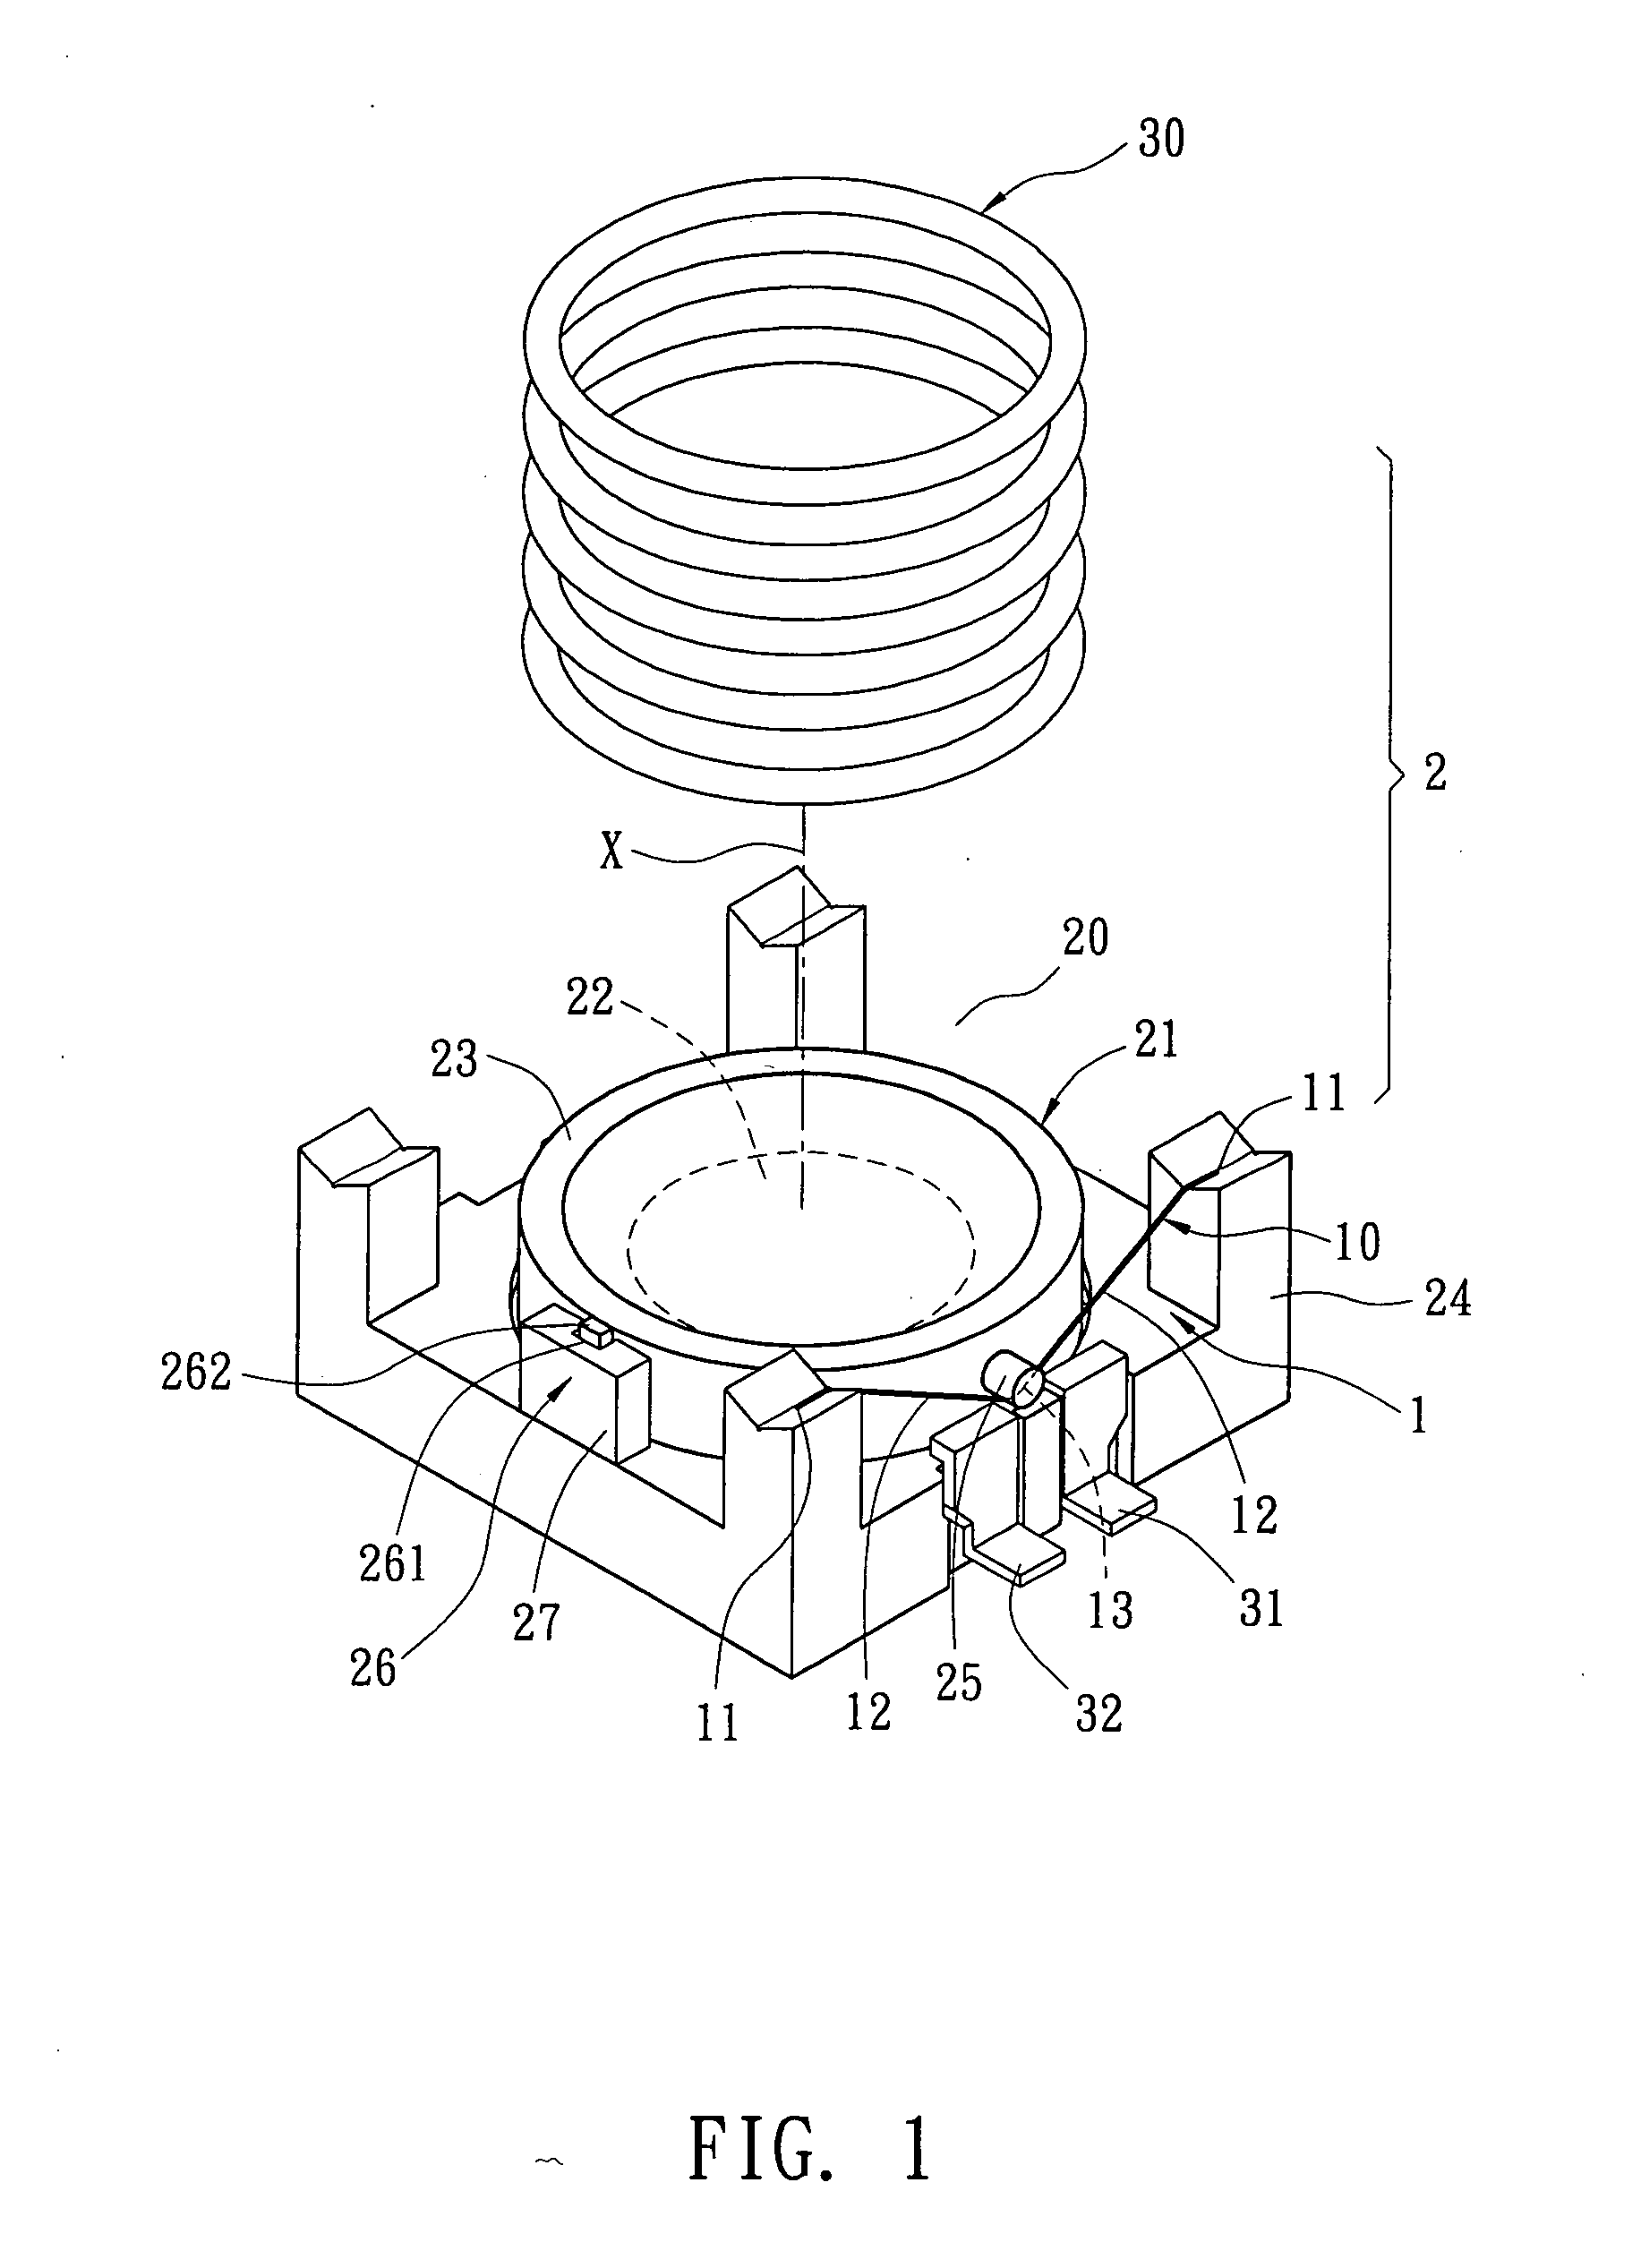 Lens displacement mechanism using shaped memory alloy